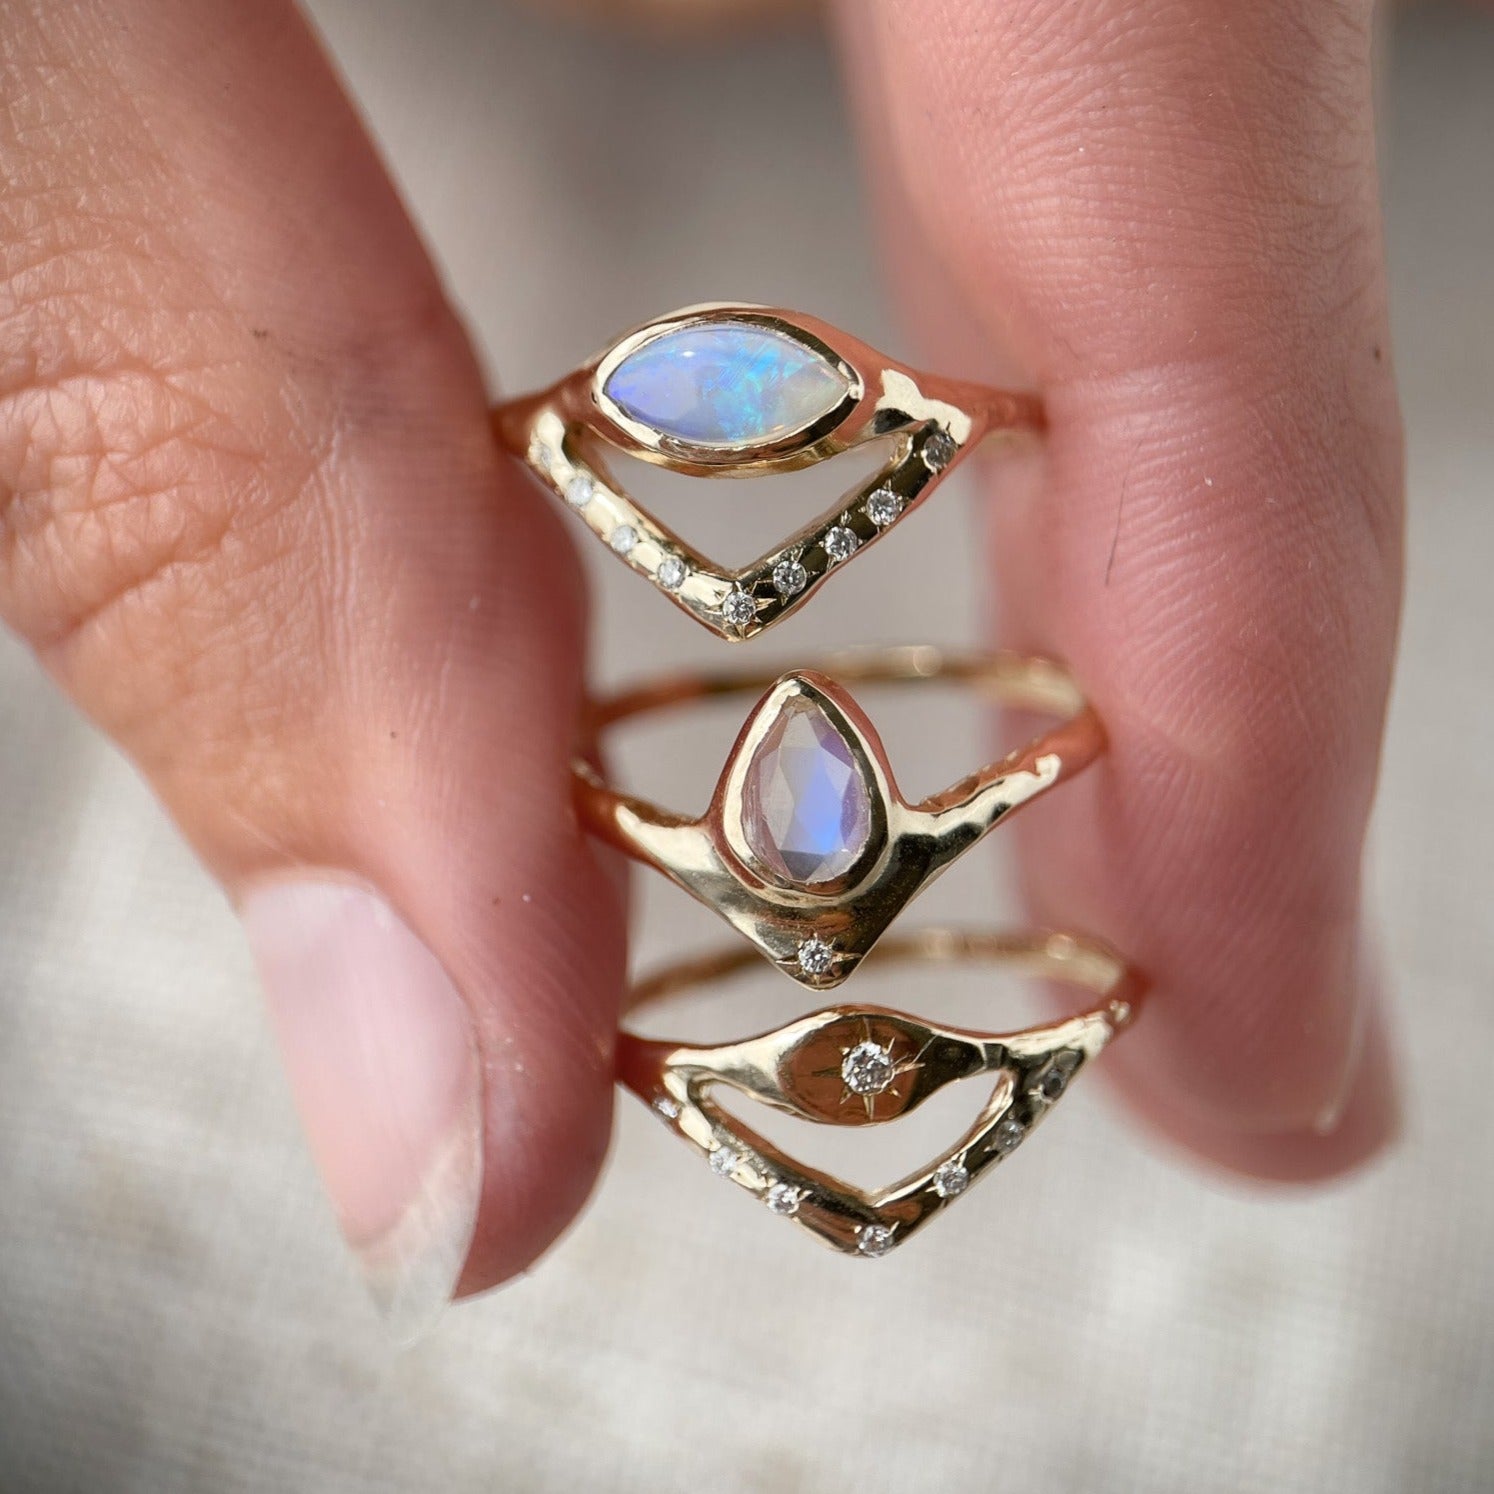 Pear-shaped moonstone, bezel-set with a dazzling diamond star positioned at the base, stacked with an opal ring and a diamond ring.